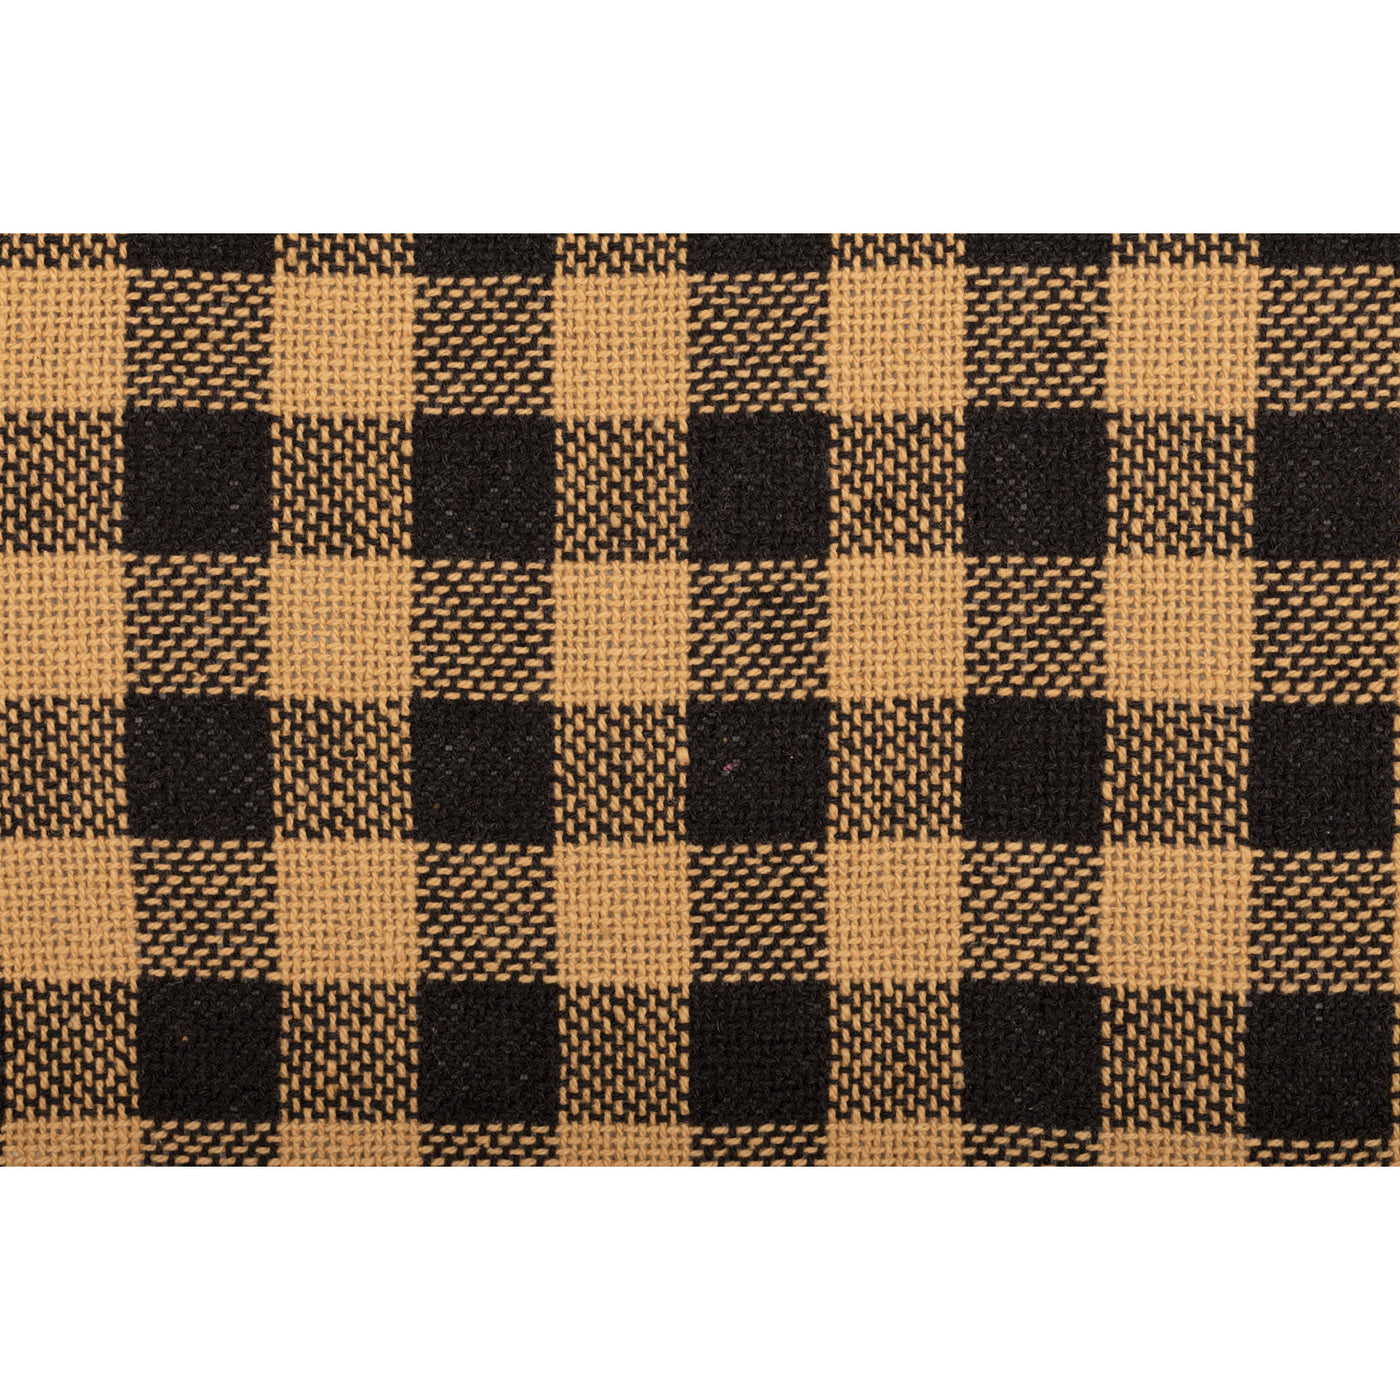 Burlap Black And Tan Check Fringed Table Runner 13" x 36"